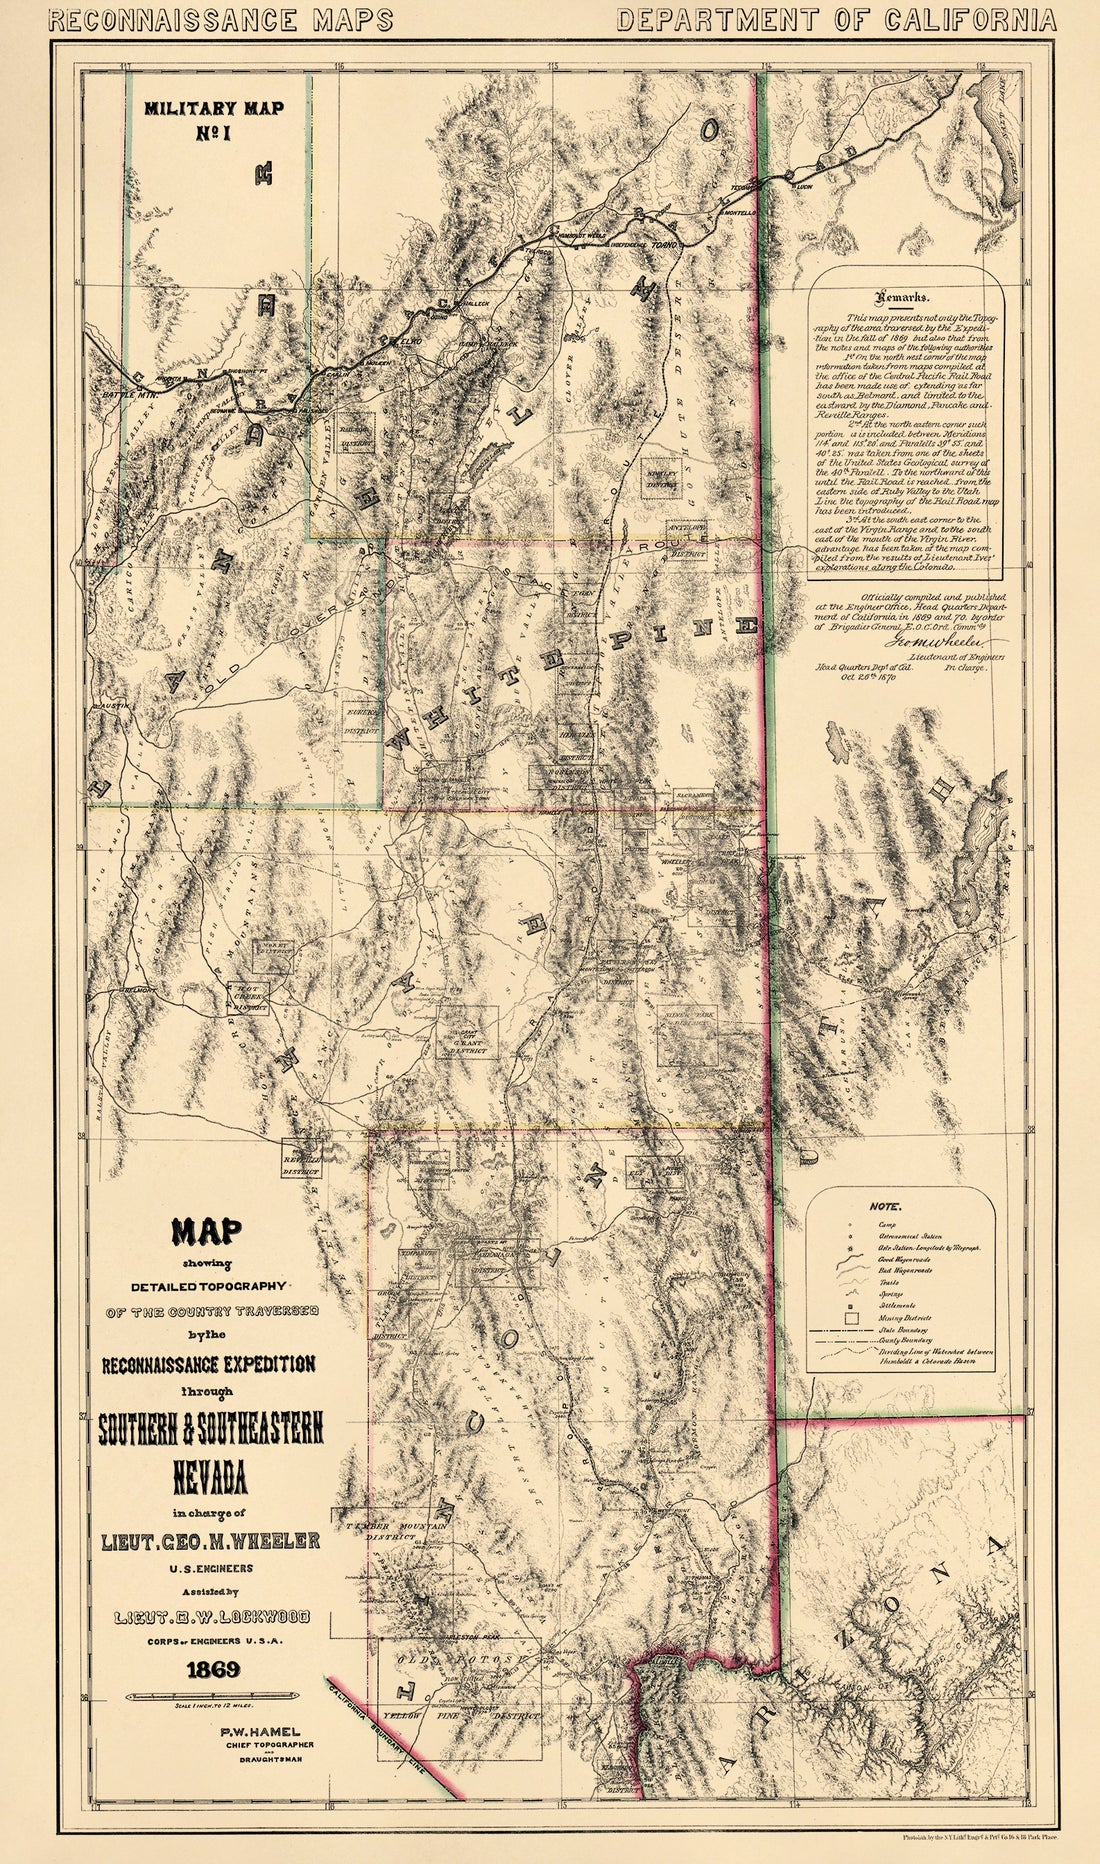 Map Showing Detailed Topography of the Country Traversed by the Reconnaissance Expedition Through Southern and Southeastern Nevada (Reconnaissance Maps : Department of California, Military Map No. 1) 1870